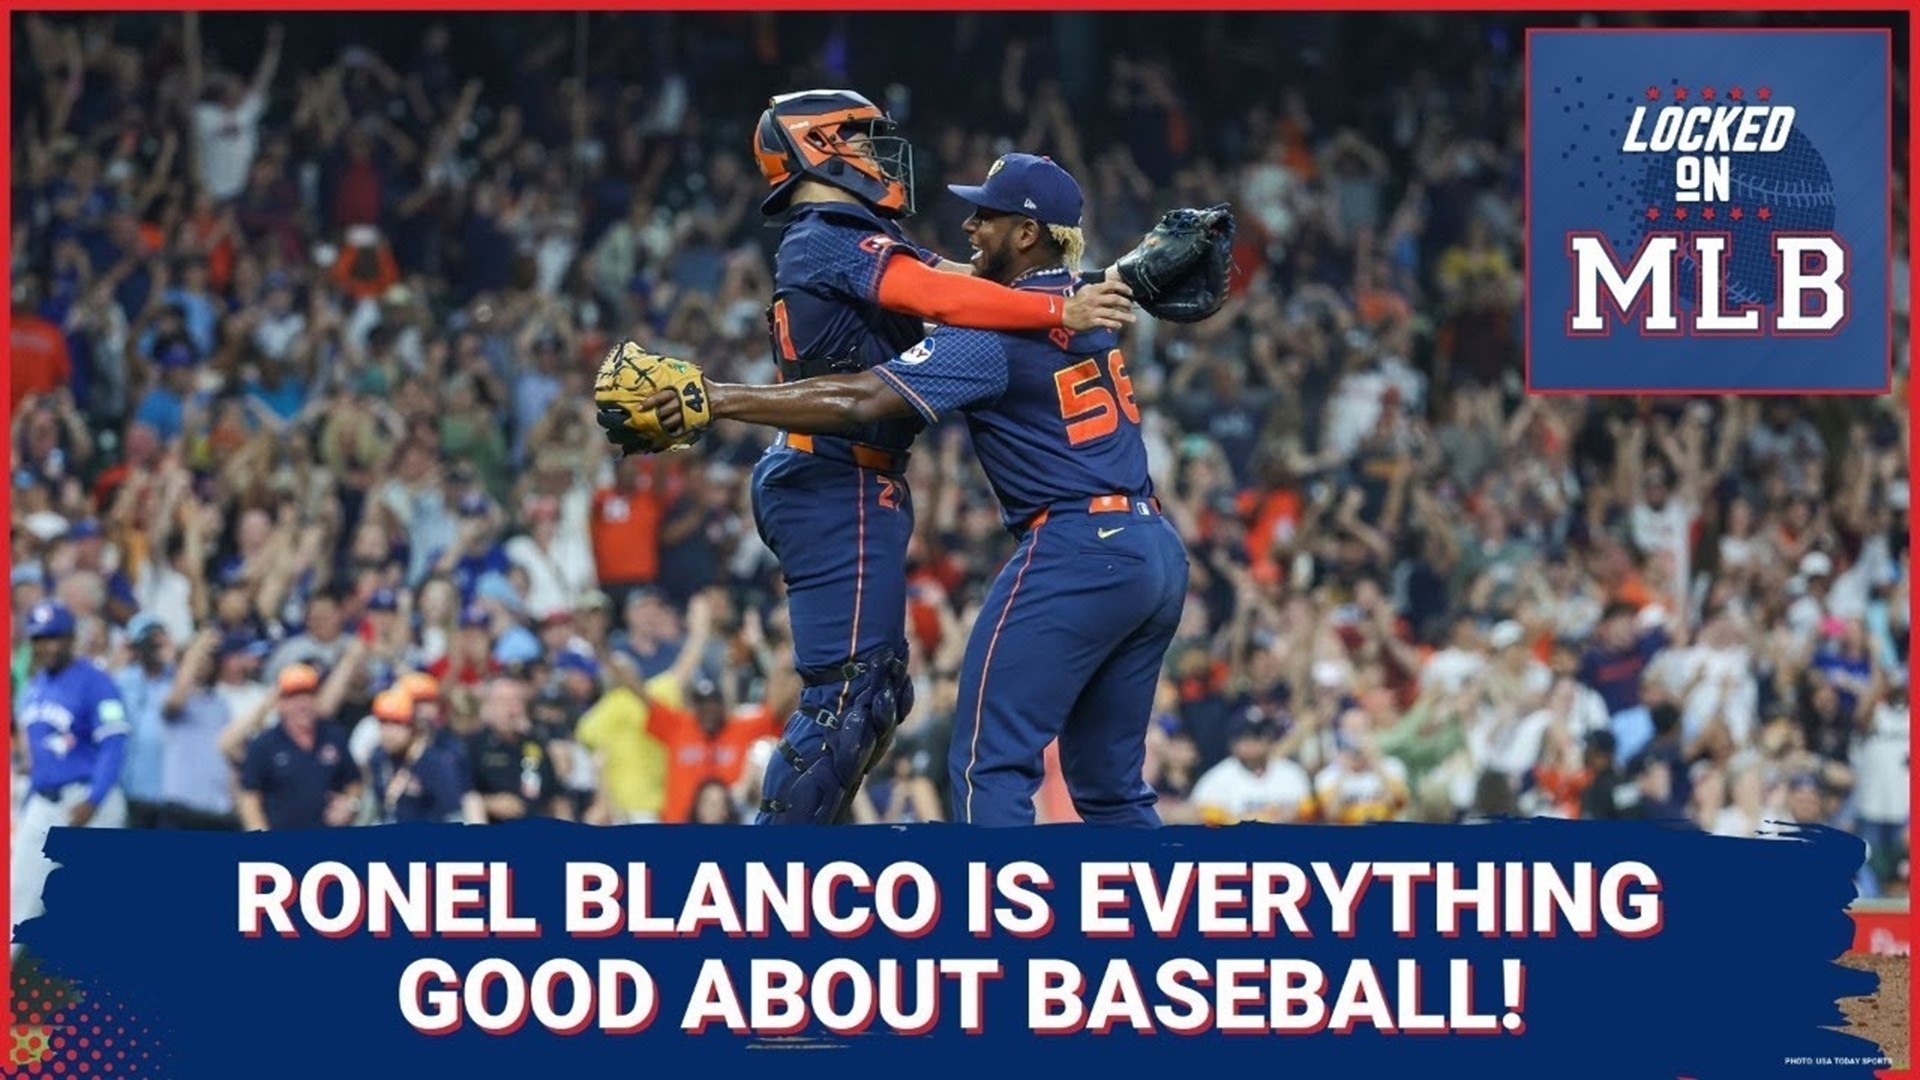 Chances are you did not give Ronel Blanco much thought before last night. And in the span of one game, Ronel Blanco became the focus of the baseball world.